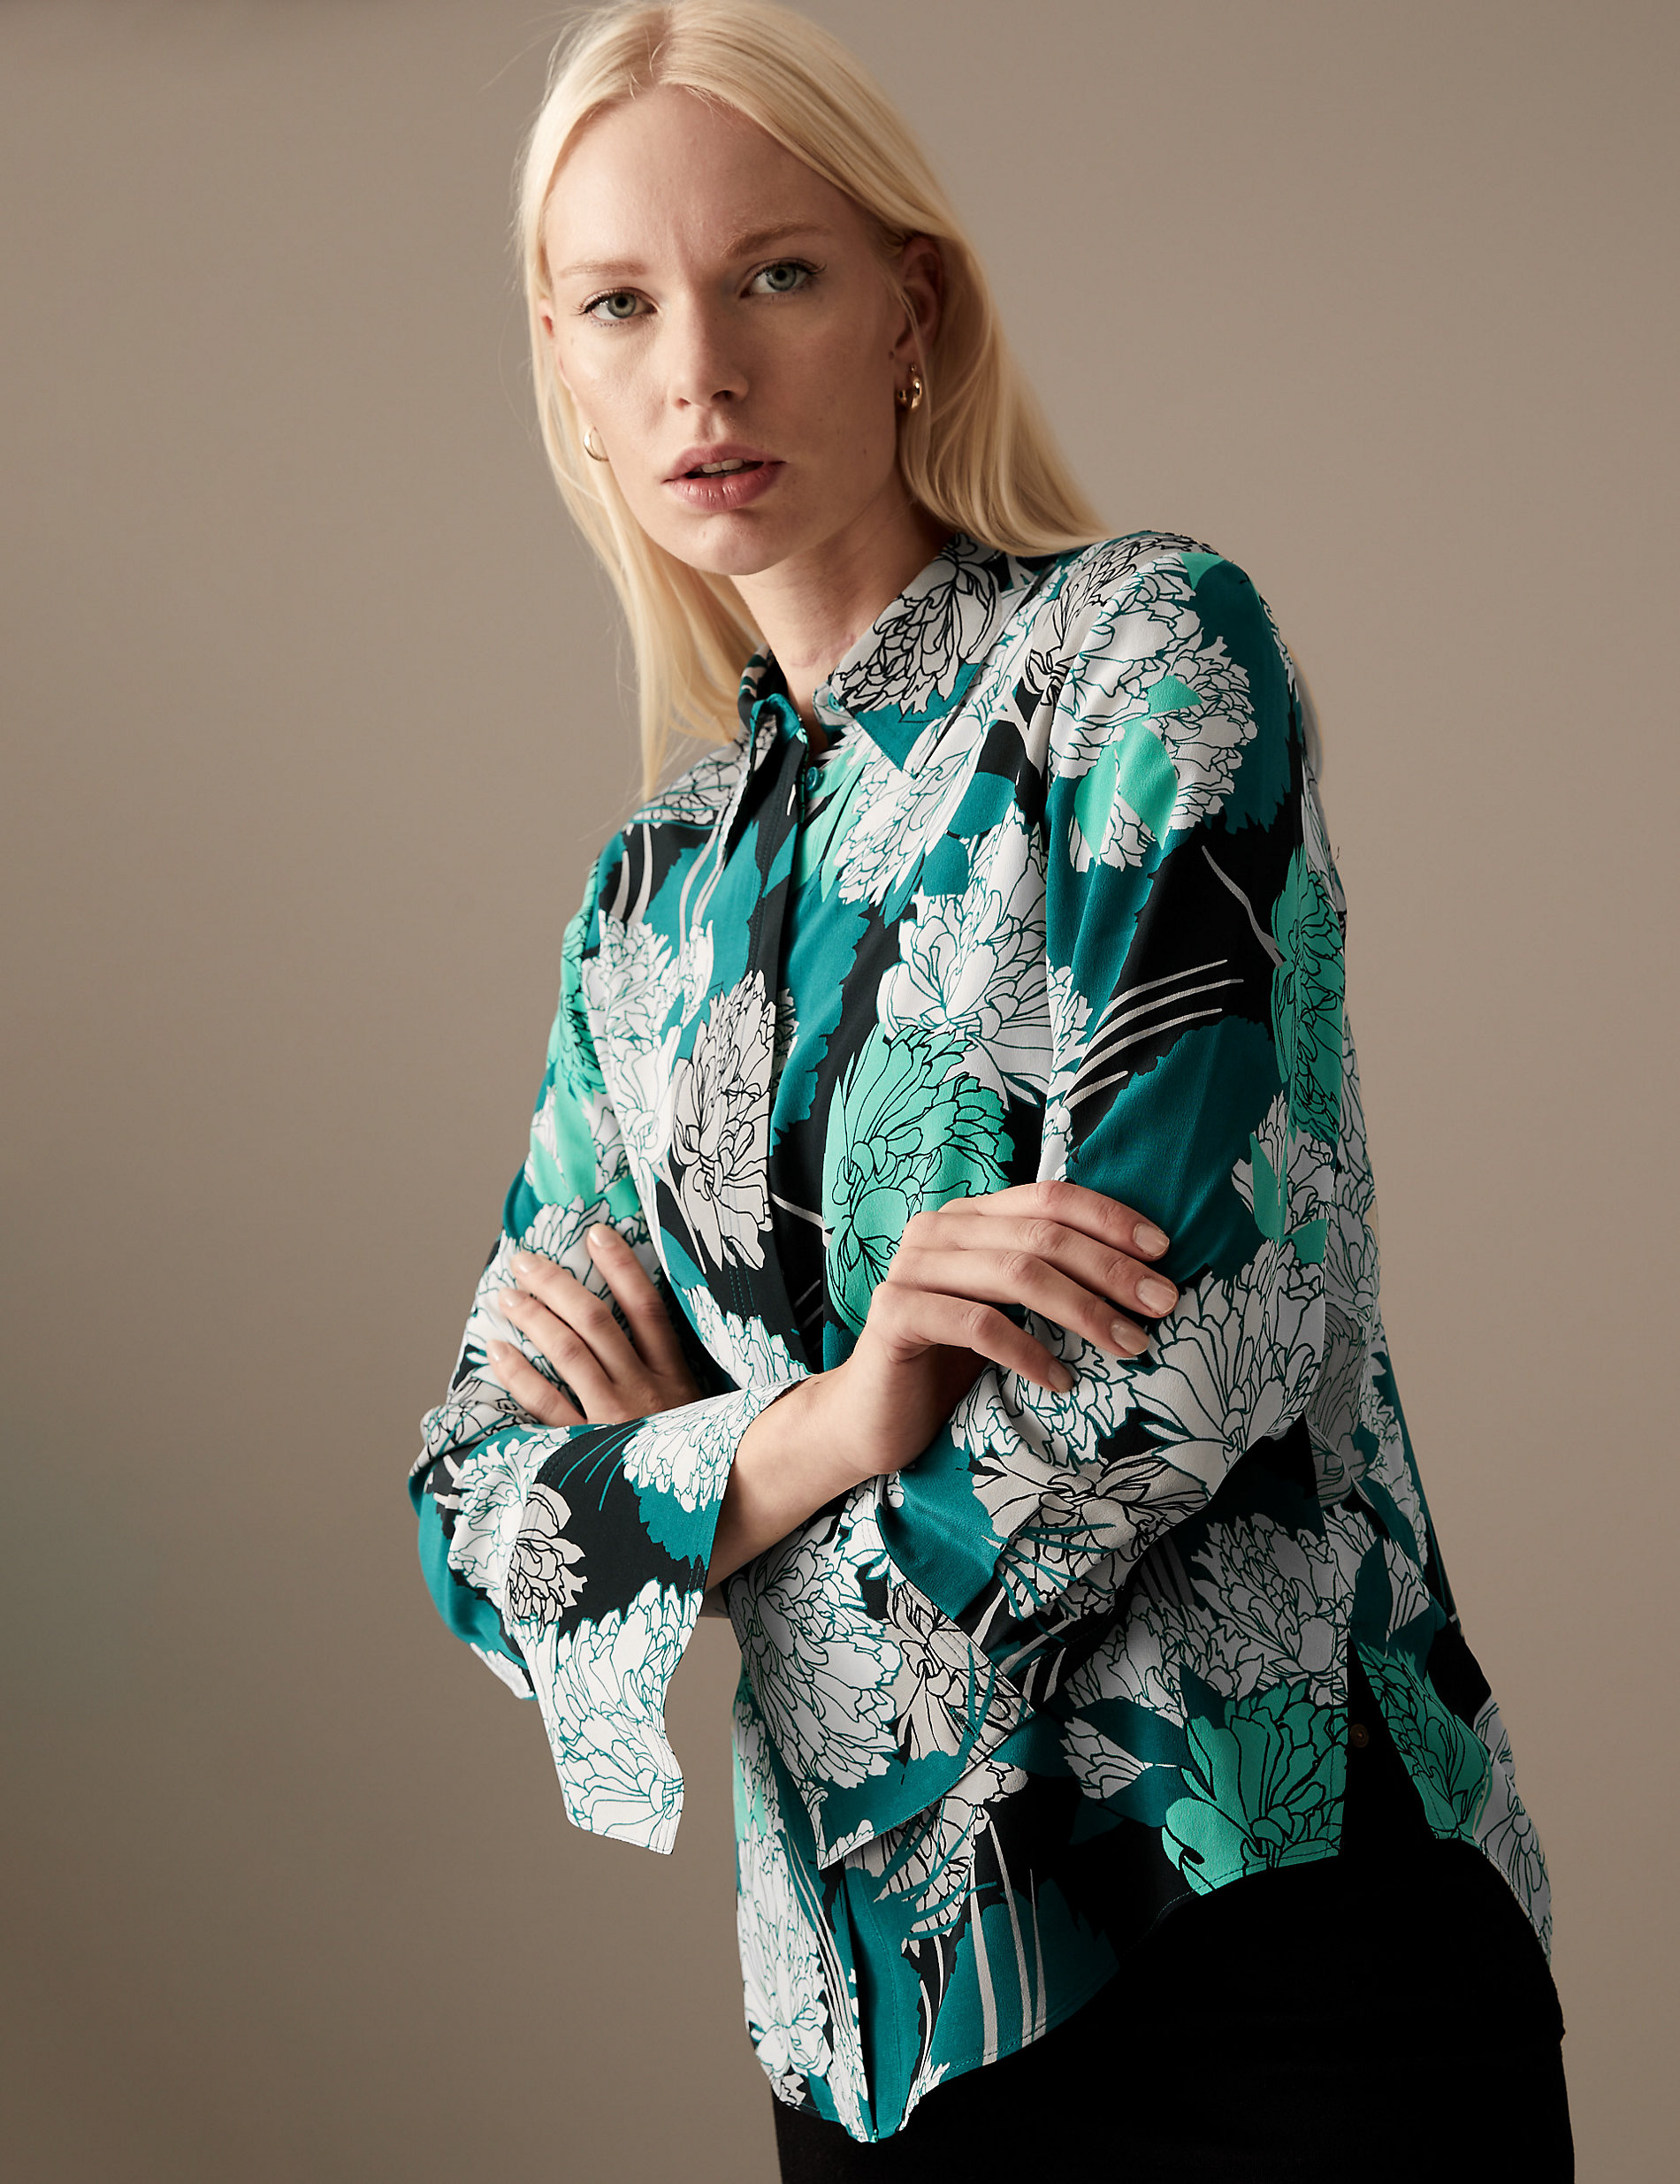 Pure Silk Floral Collared Long Sleeve Shirt